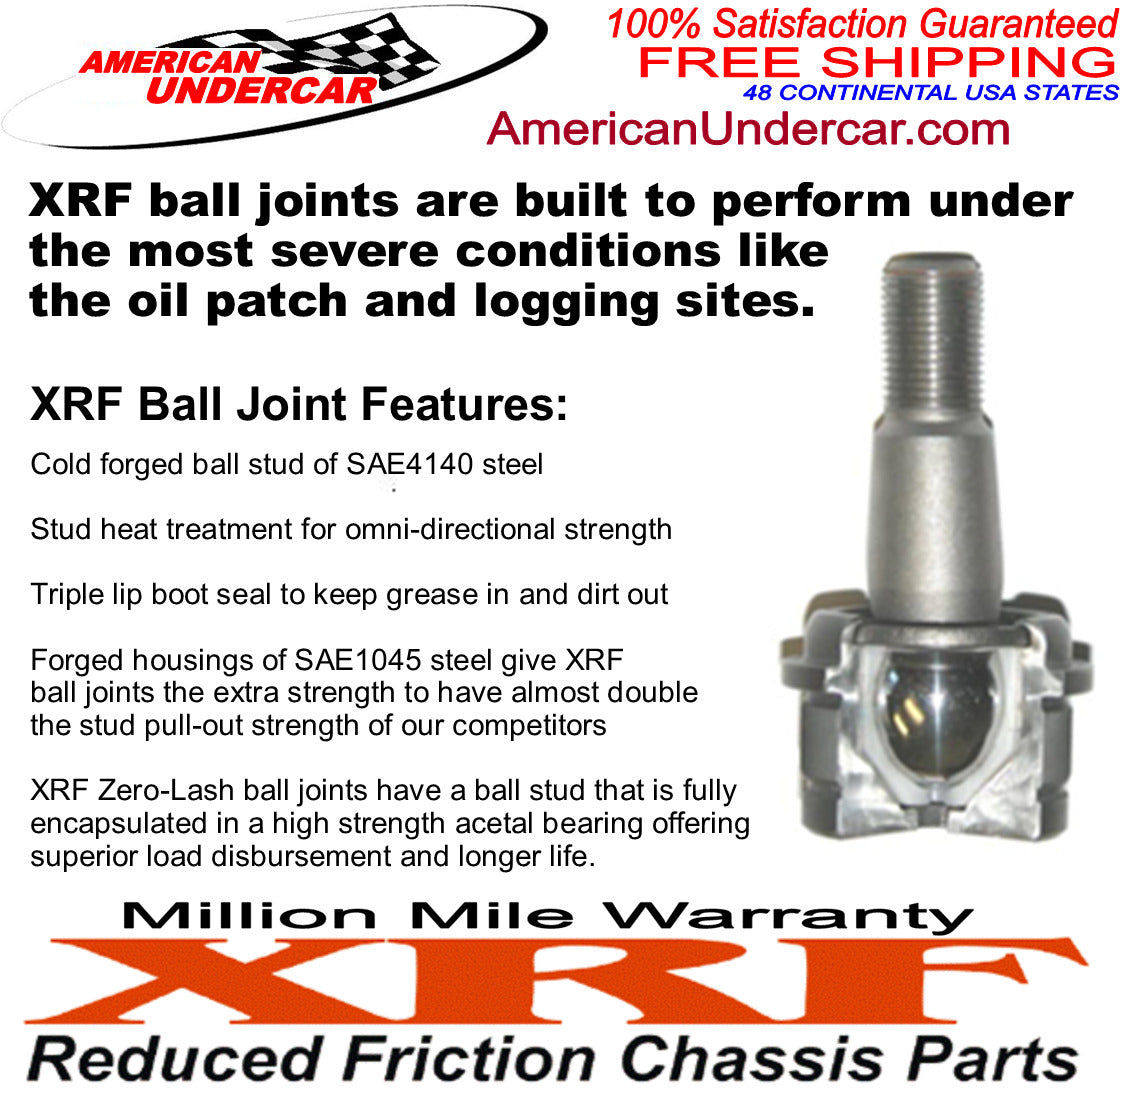 XRF Upper & Lower Ball Joint Suspension Kit for 2008-2018 Dodge Ram 4500, 5500 2WD, 4x4